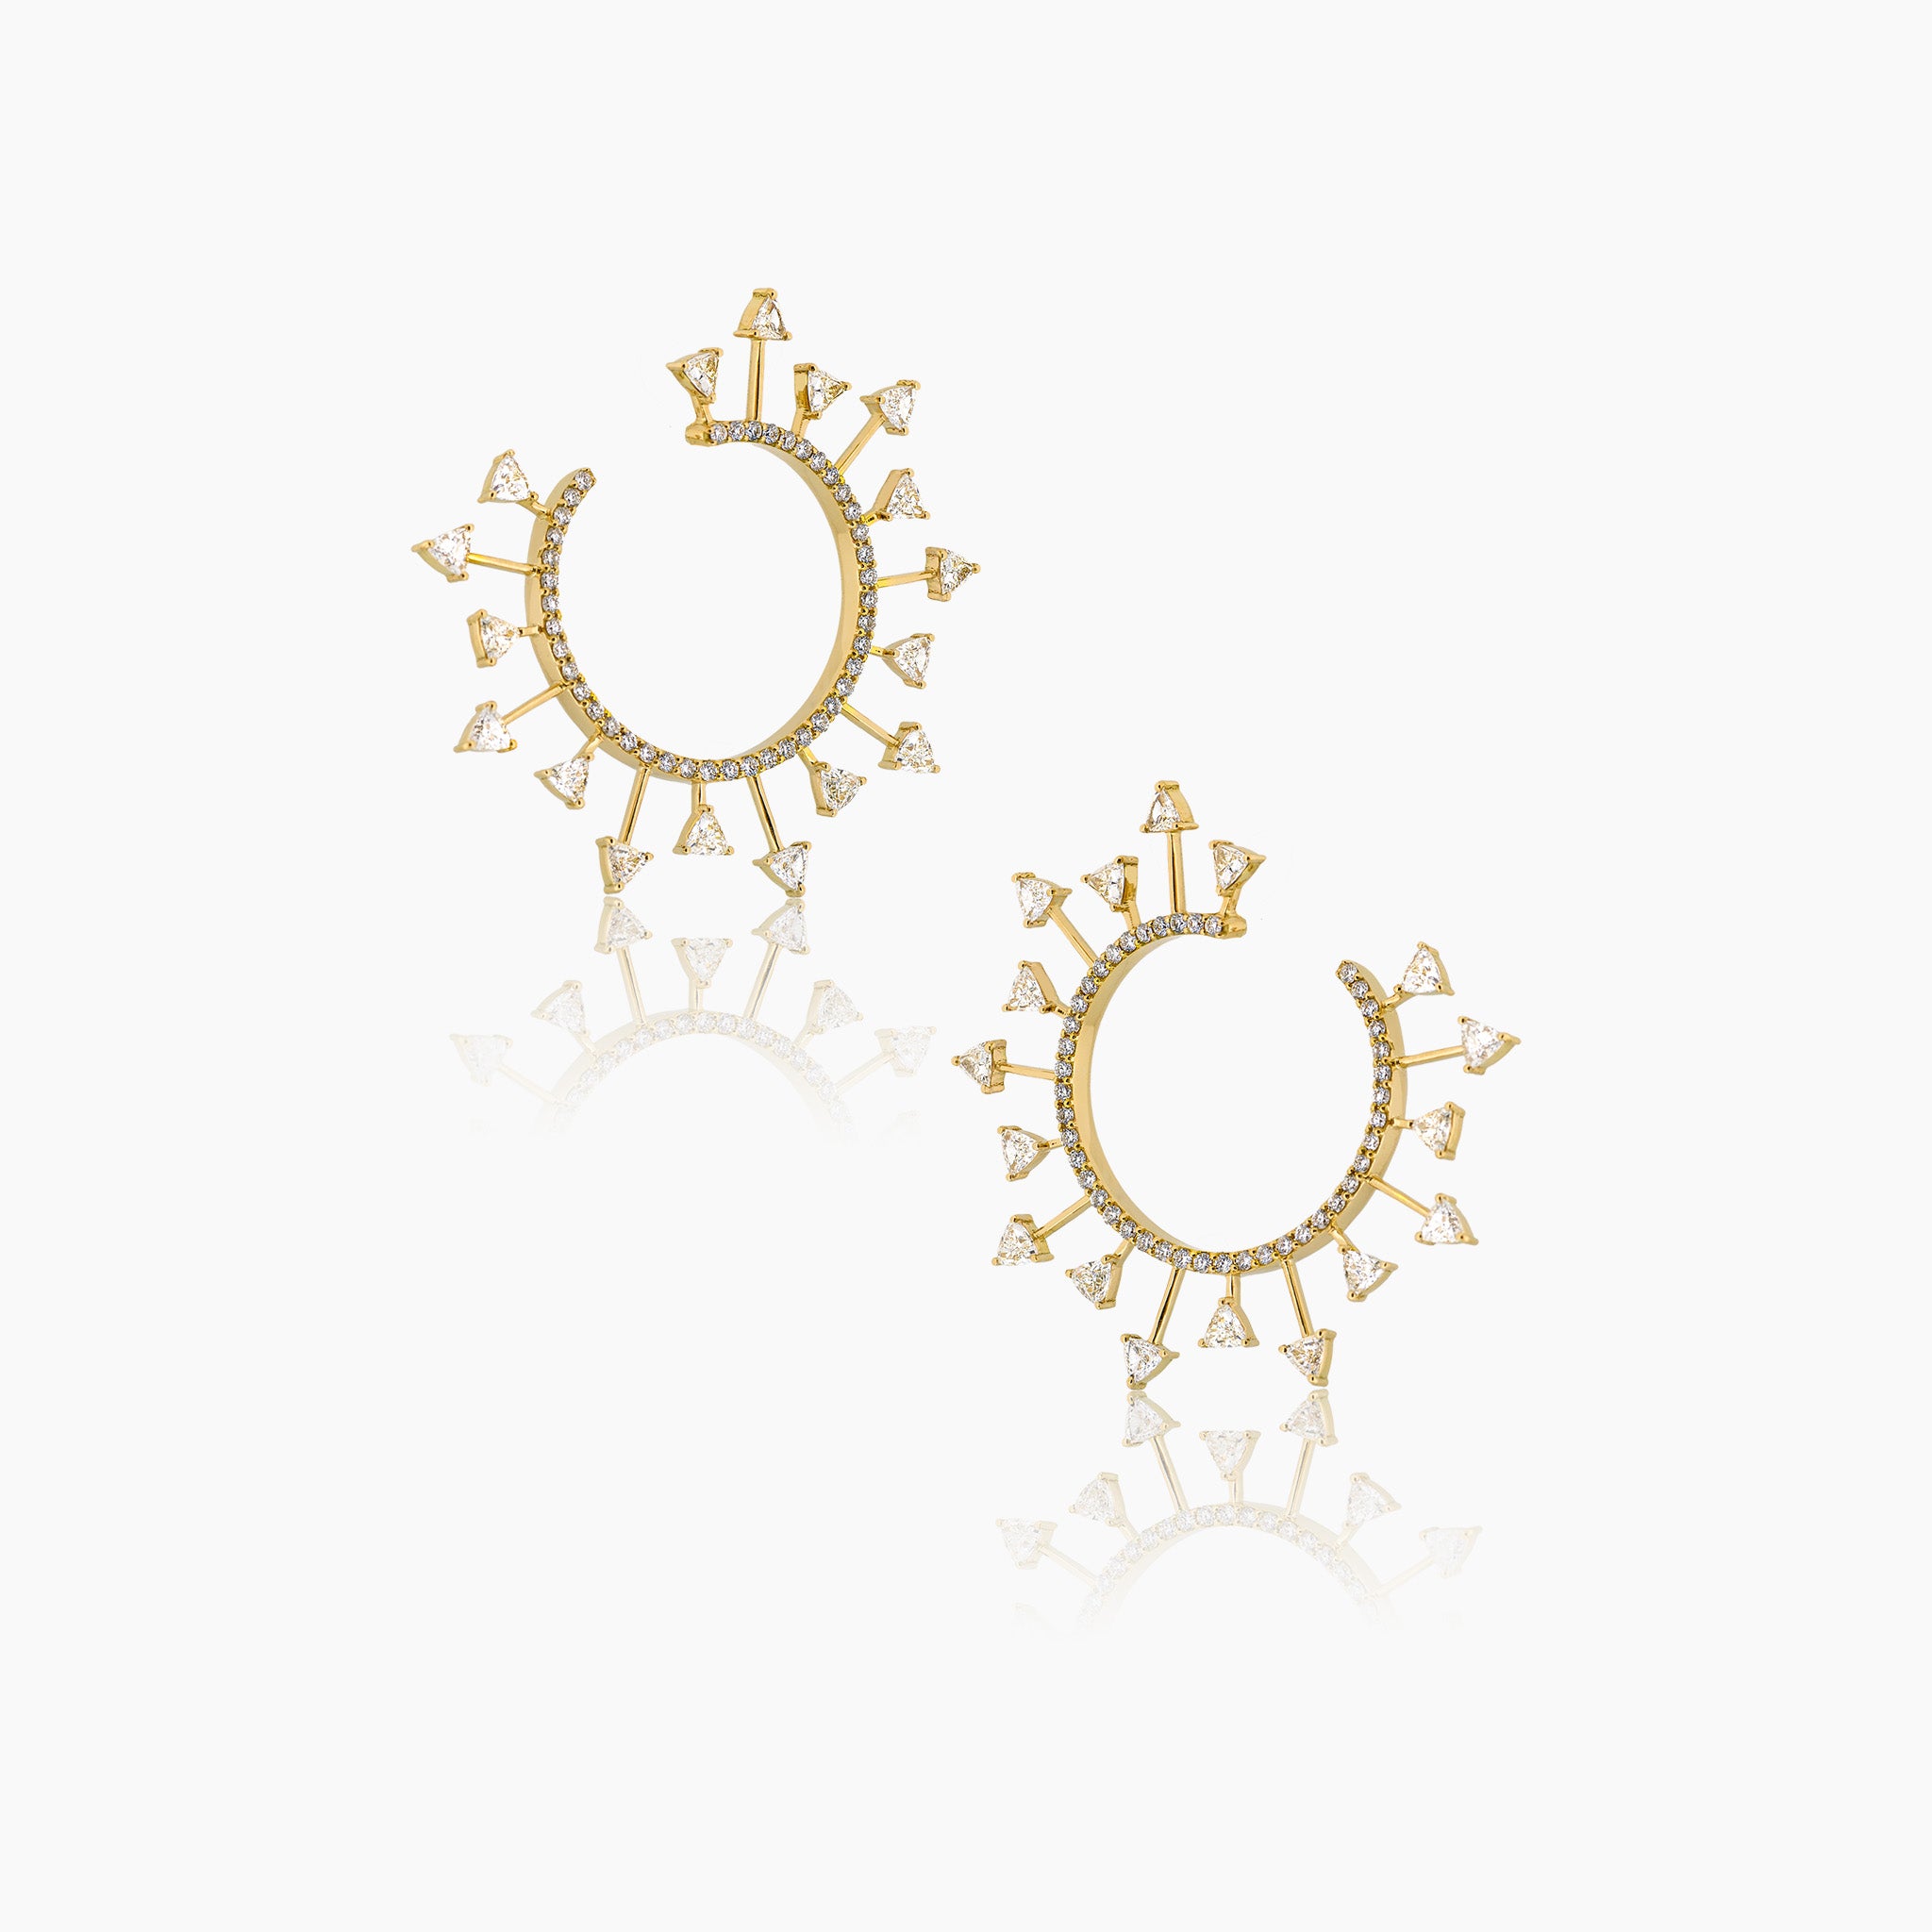 Yellow gold SunScape spiral hoop earrings with trillion-cut diamonds, set against an off-white background.